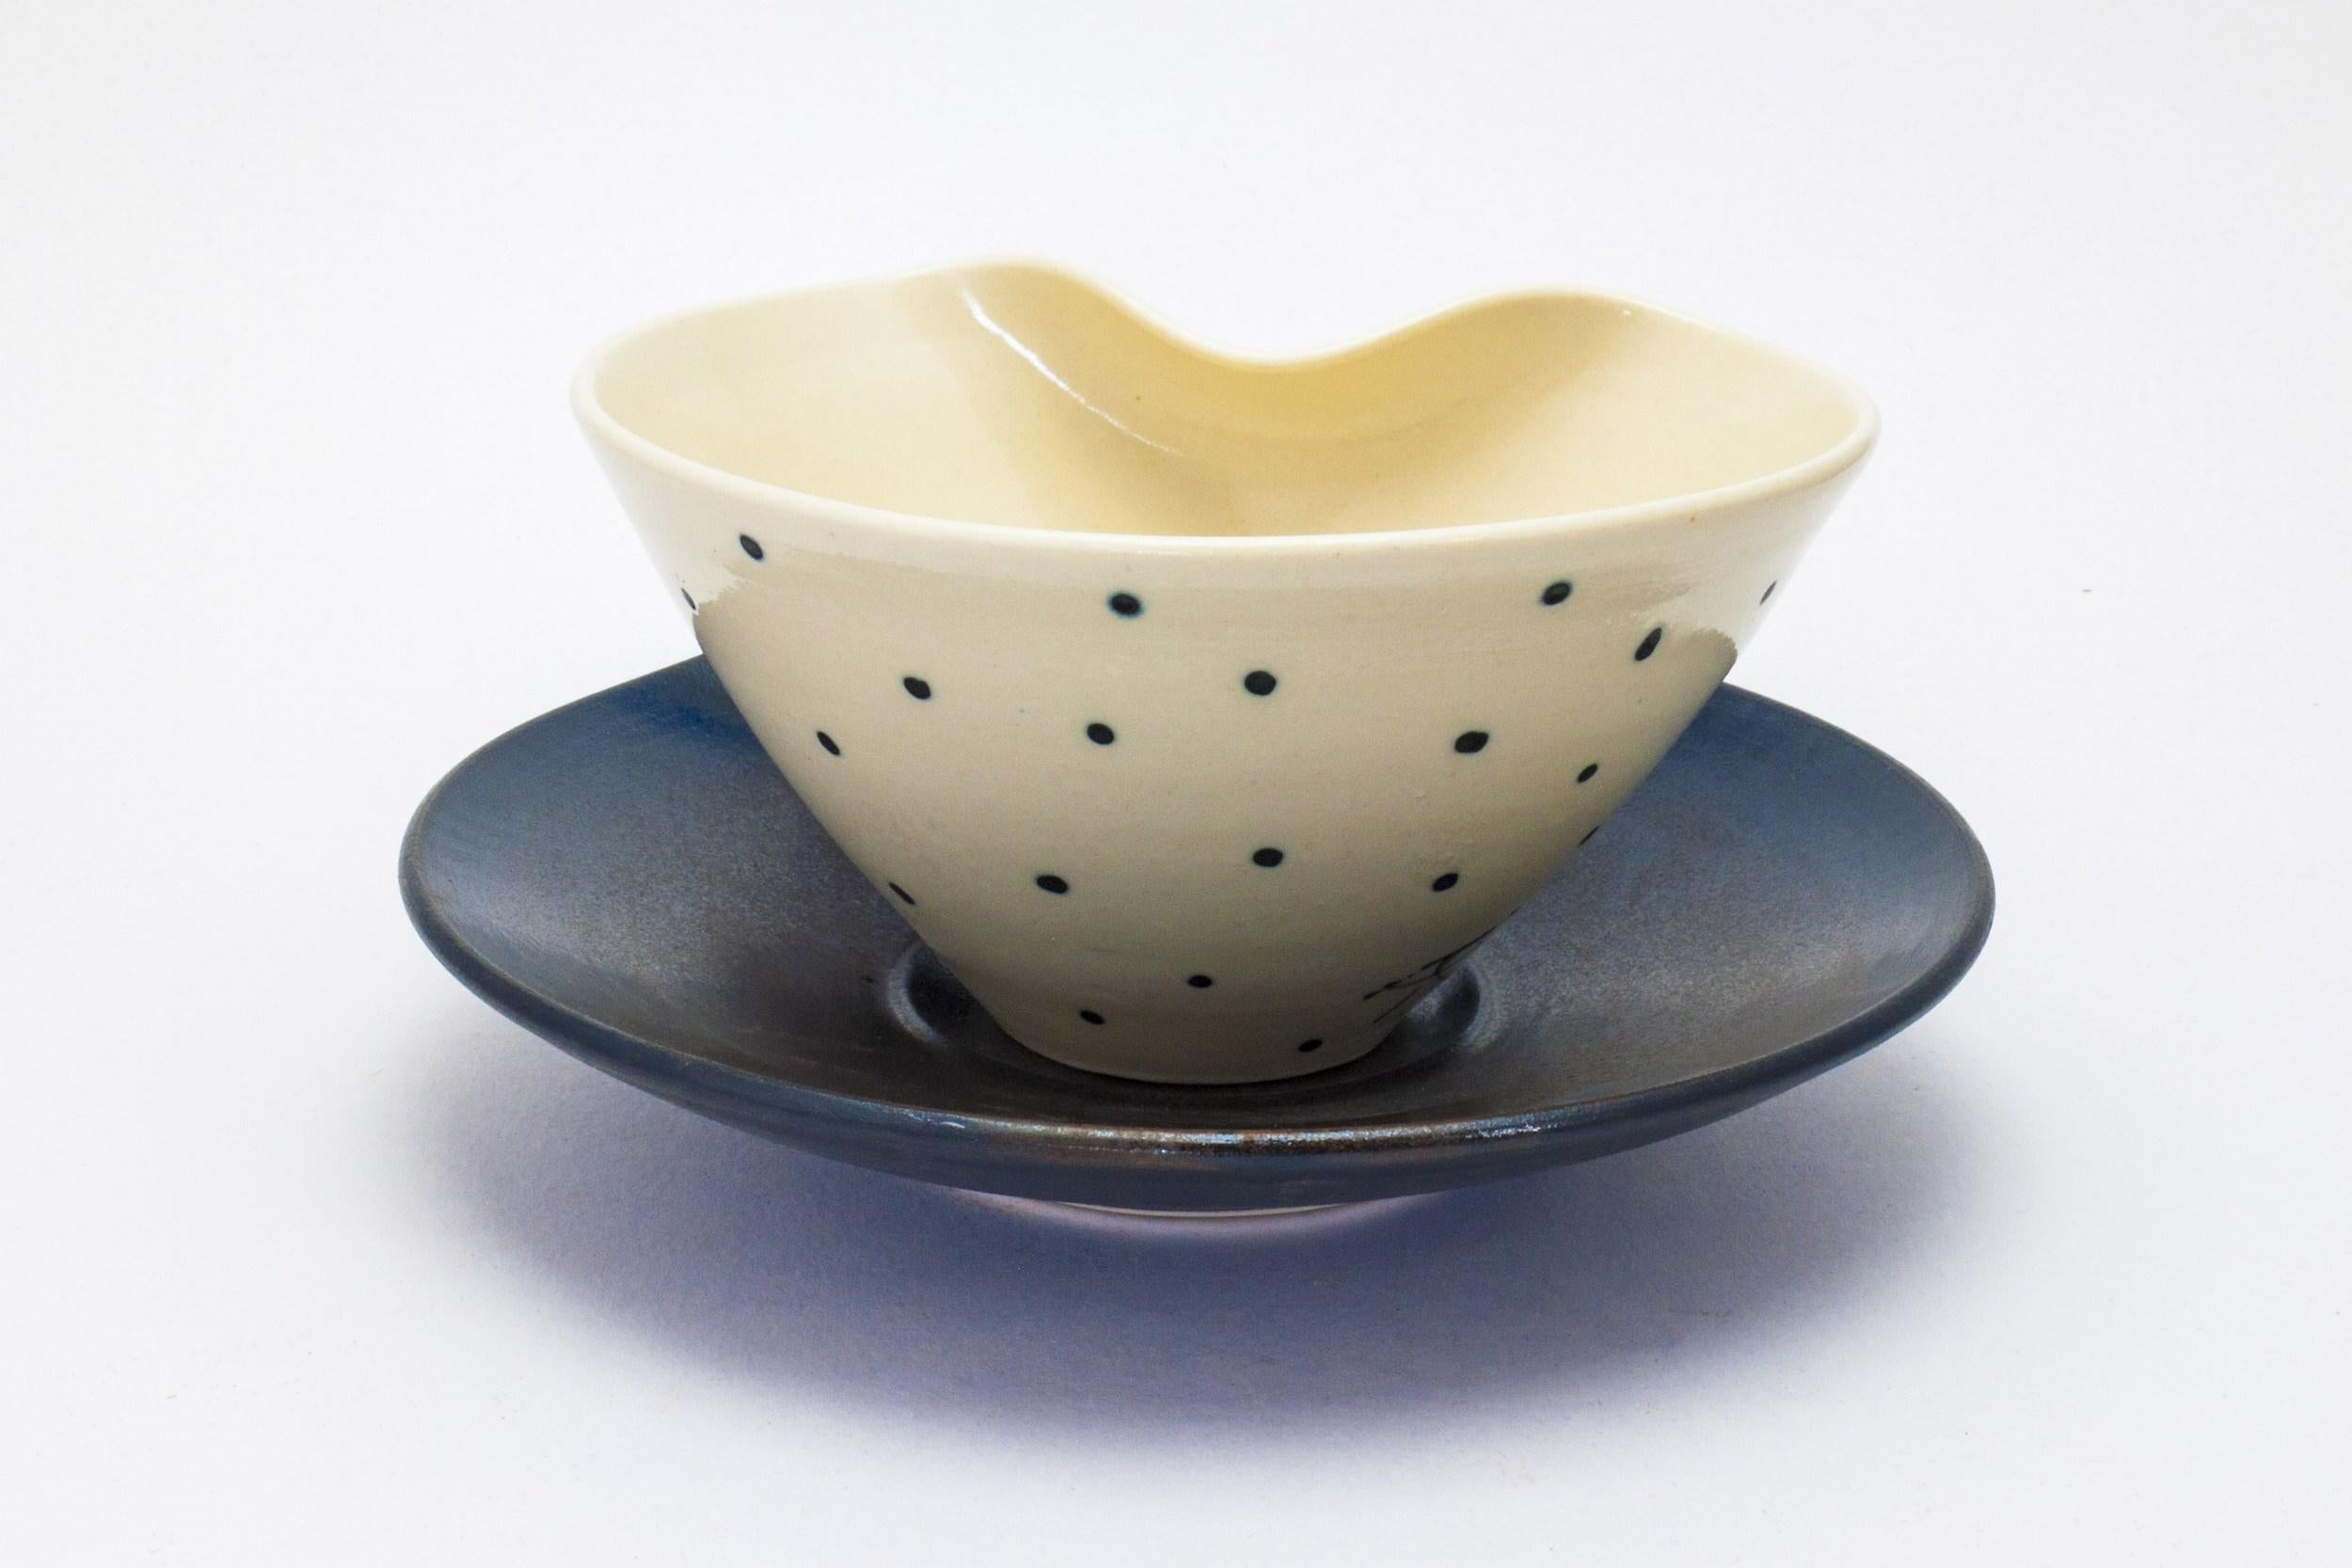 Lithograph printed soup bowl with plate - Contemporary Sculpture by Theresa Robinson